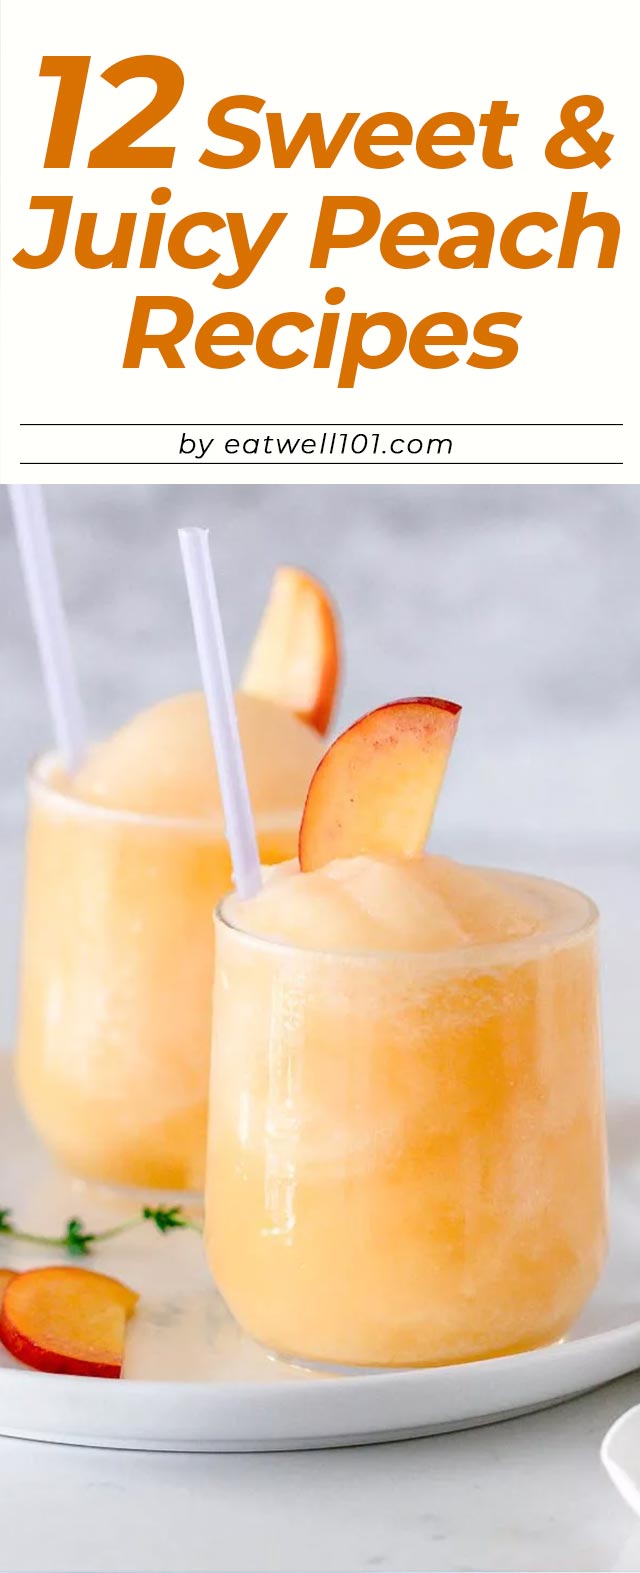 Peach Recipes - #peach #recipes #eatwell101 - Enjoy sweet, juicy peaches this summer with our best peach recipes for appetizers, desserts, breakfast, and cocktails!